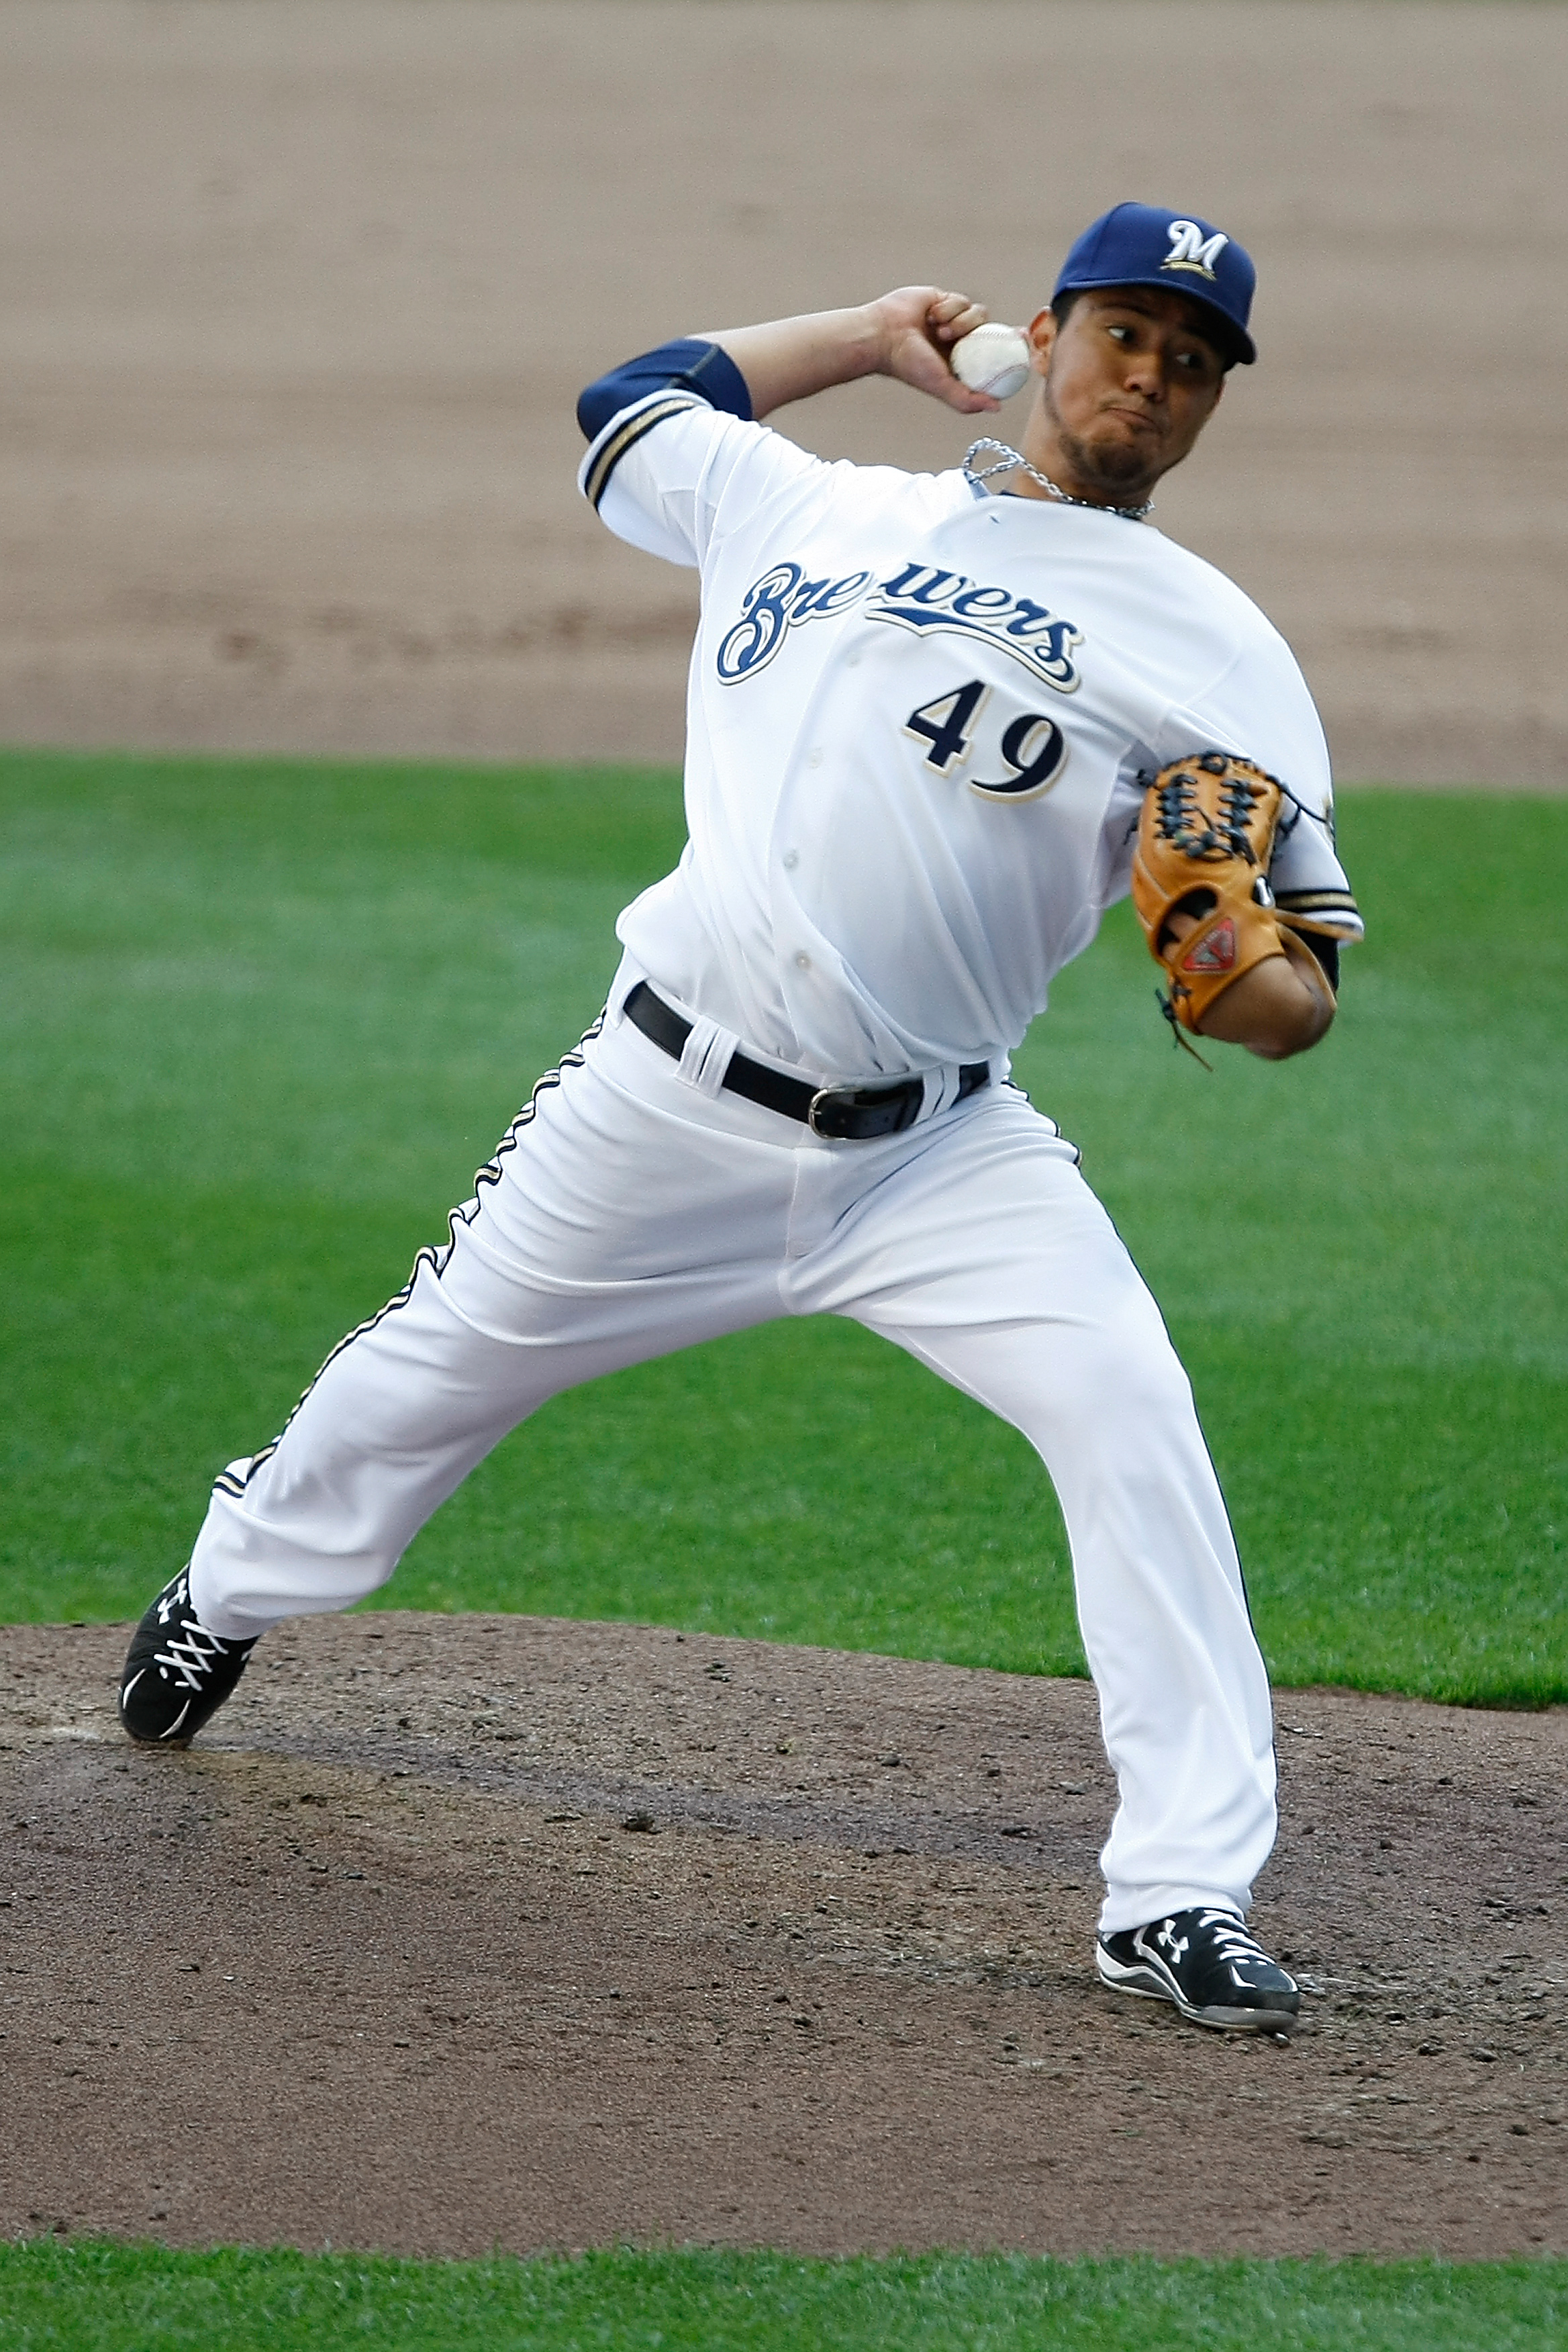 MILWAUKEE, WI - APRIL 05: Pitcher Yovani Gallardo #49 of the Milwaukee Brewers pitches the baseball against the Colorado Rockies at the Miller Park on April 05, 2010 in Milwaukee, Wisconsin. The Rockies defeated the Brewers 5-3.(Photo by Scott Boehm/Getty